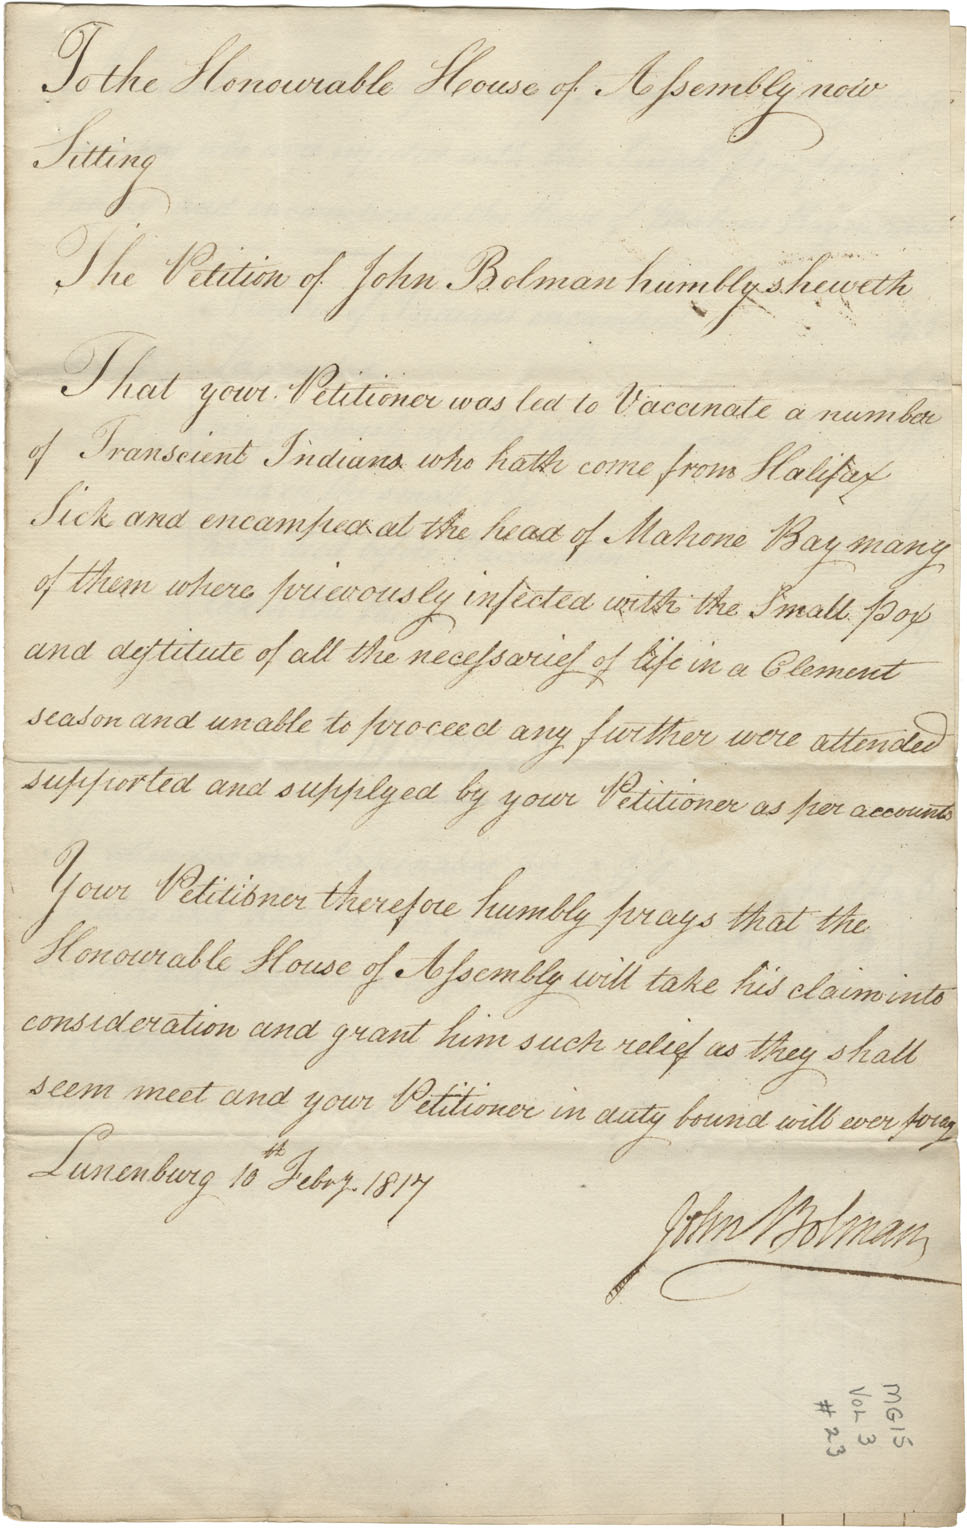 Petition of John Bolman to House of Assembly requesting reimbursement for funds expended on Mi'kmaq at Head of Mahone Bay, for vaccinations against small pox with accompanying bills. 